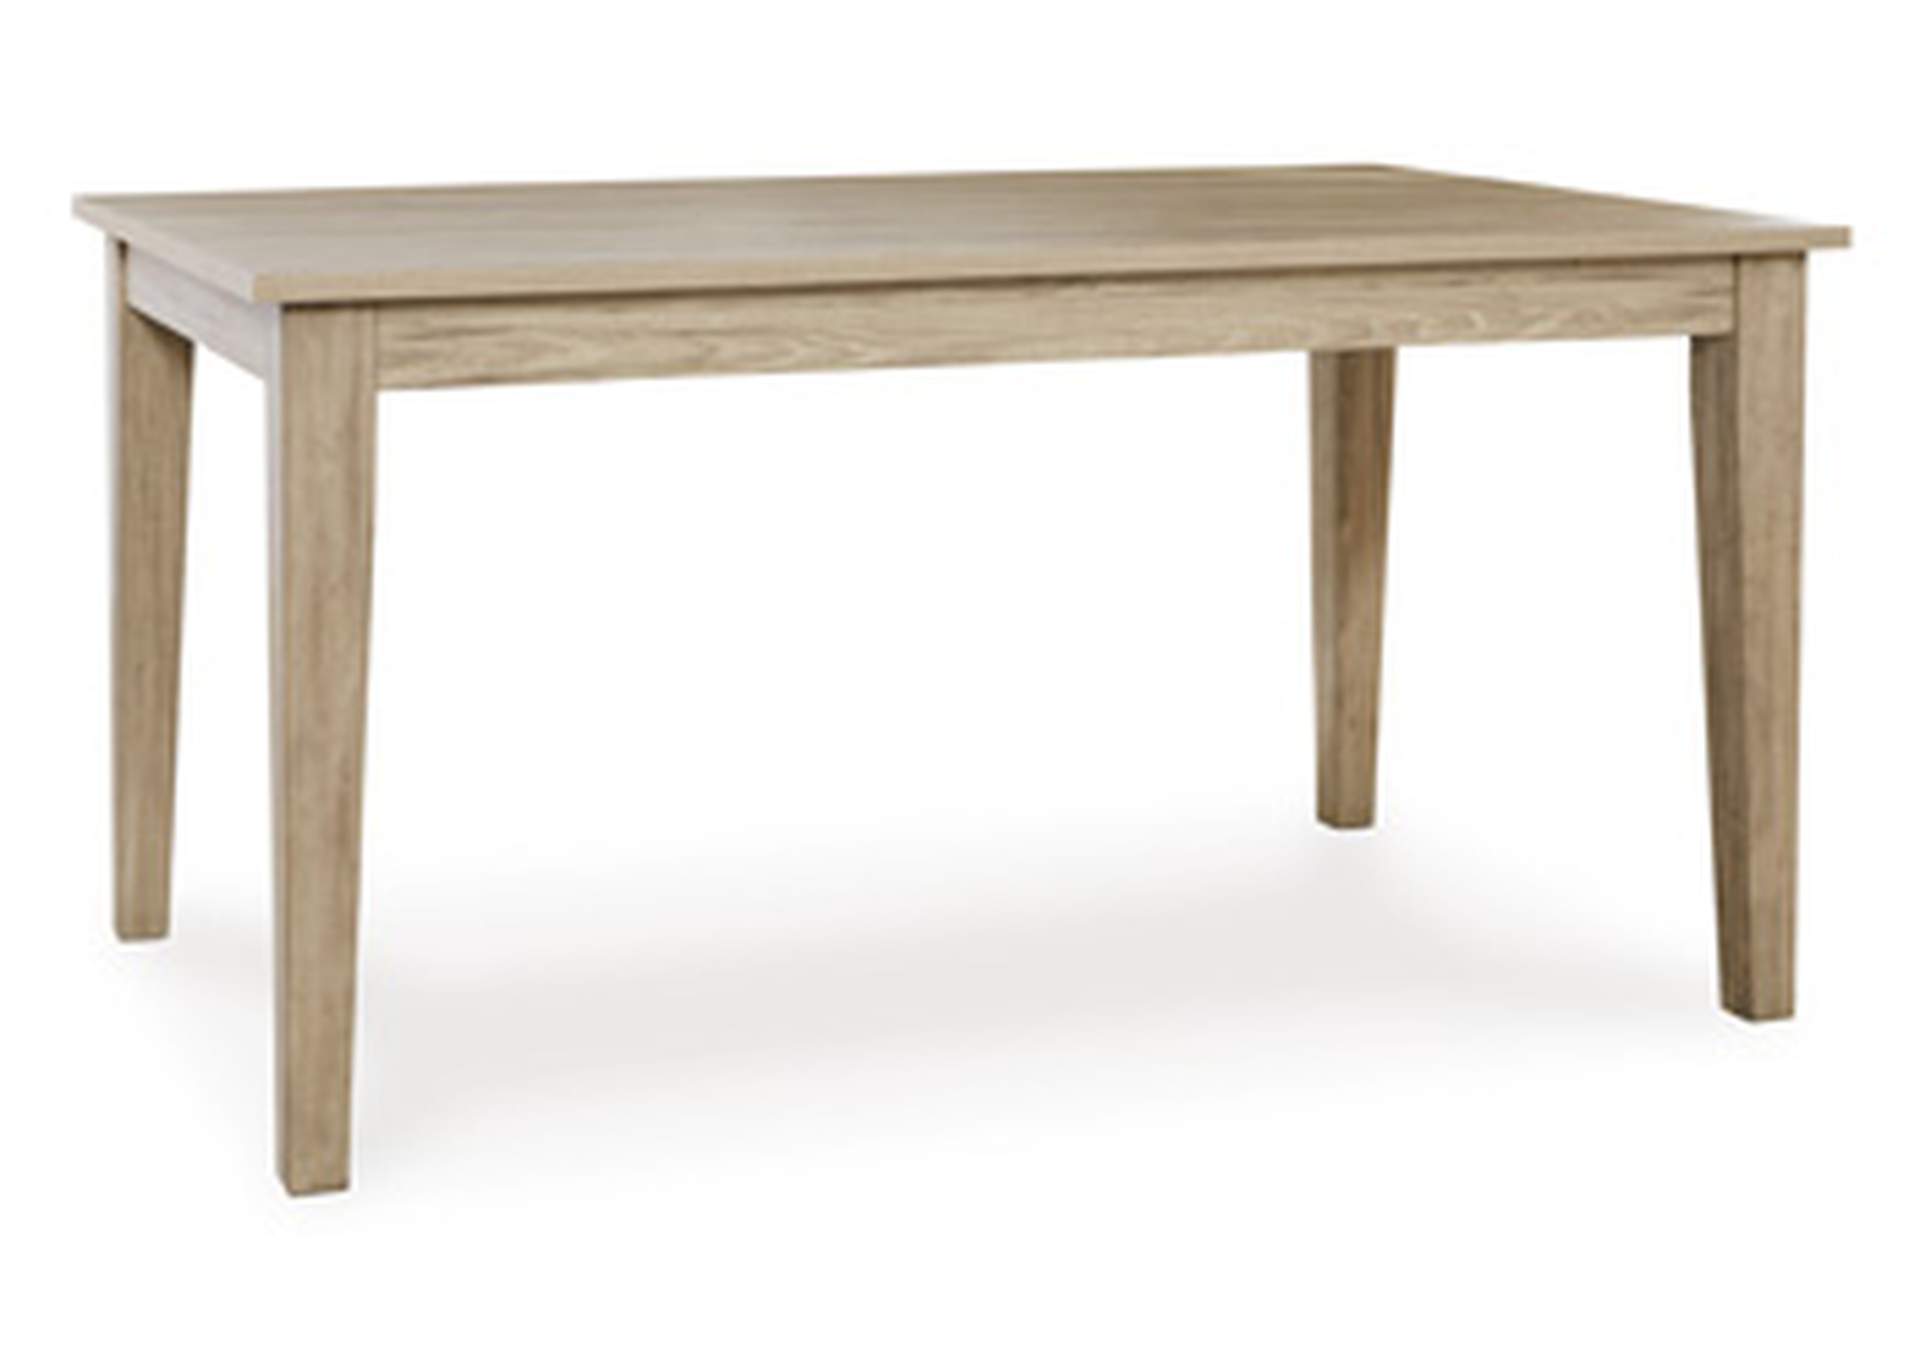 Gleanville Dining Table,Signature Design By Ashley